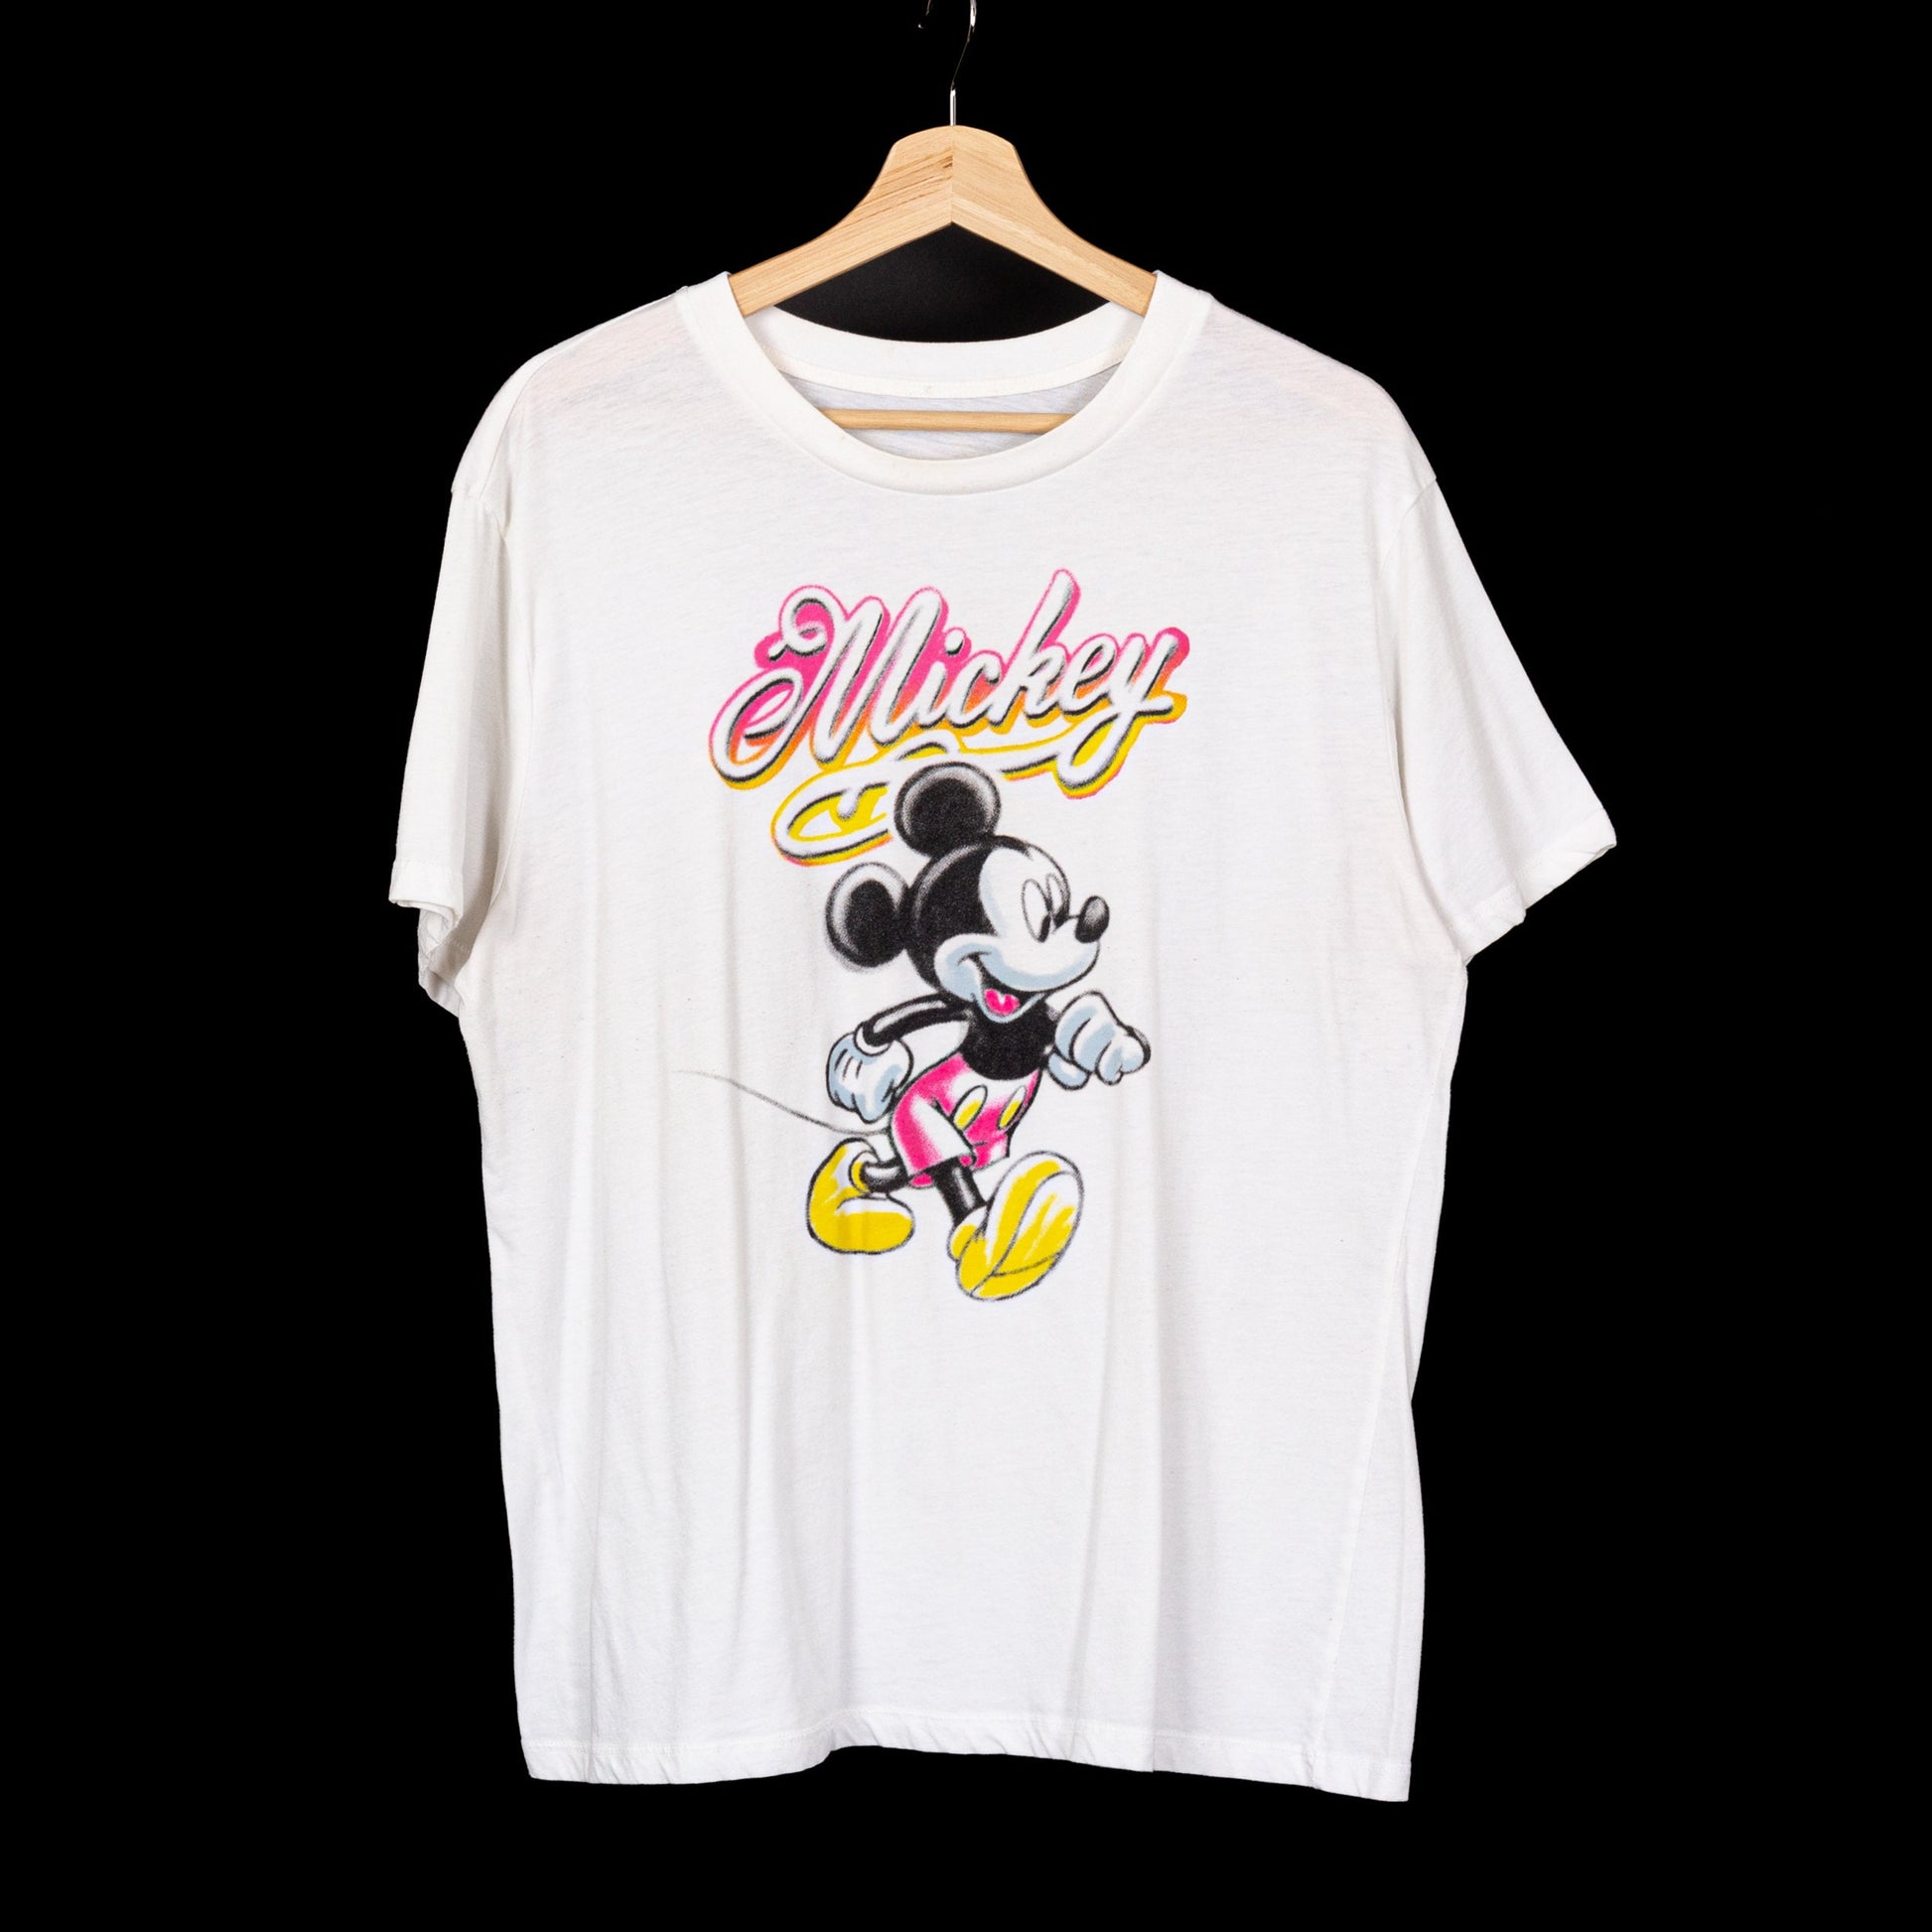 Y2K Mickey Mouse Airbrush T Shirt - Women's XL